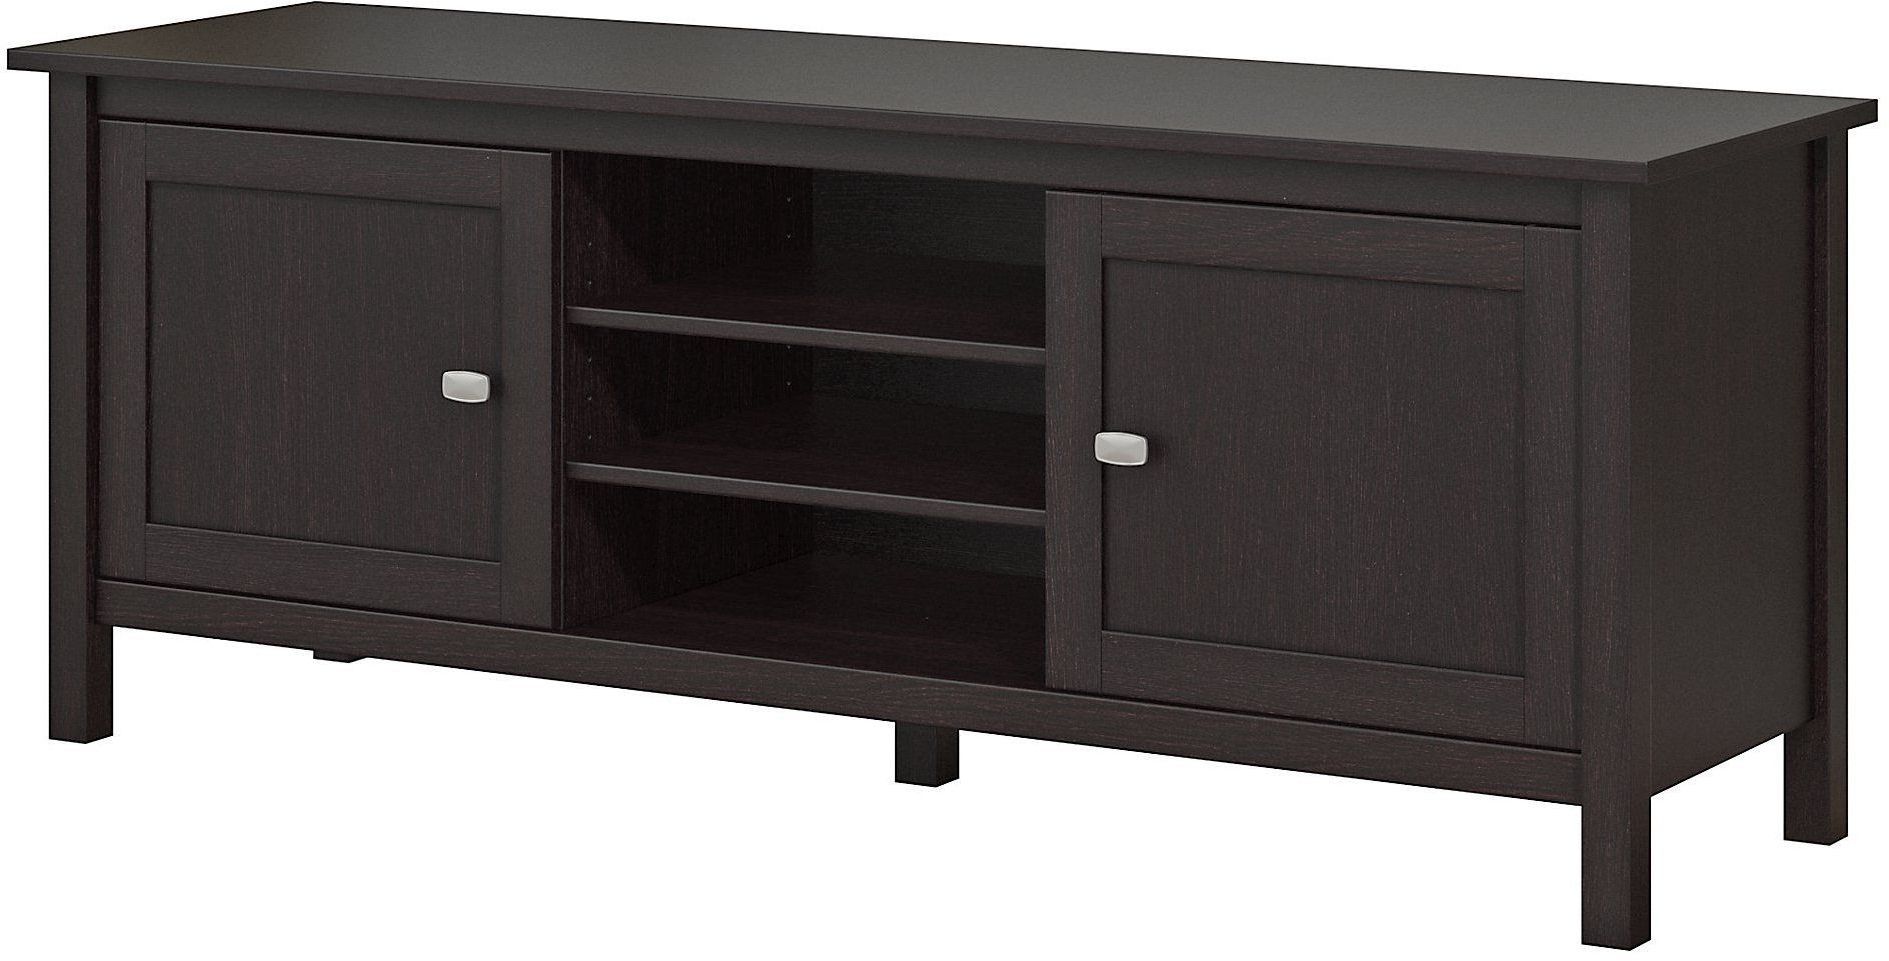 Broadview Espresso Oak 65" Tv Stand From Bush | Coleman Intended For Betton Tv Stands For Tvs Up To 65" (View 18 of 20)